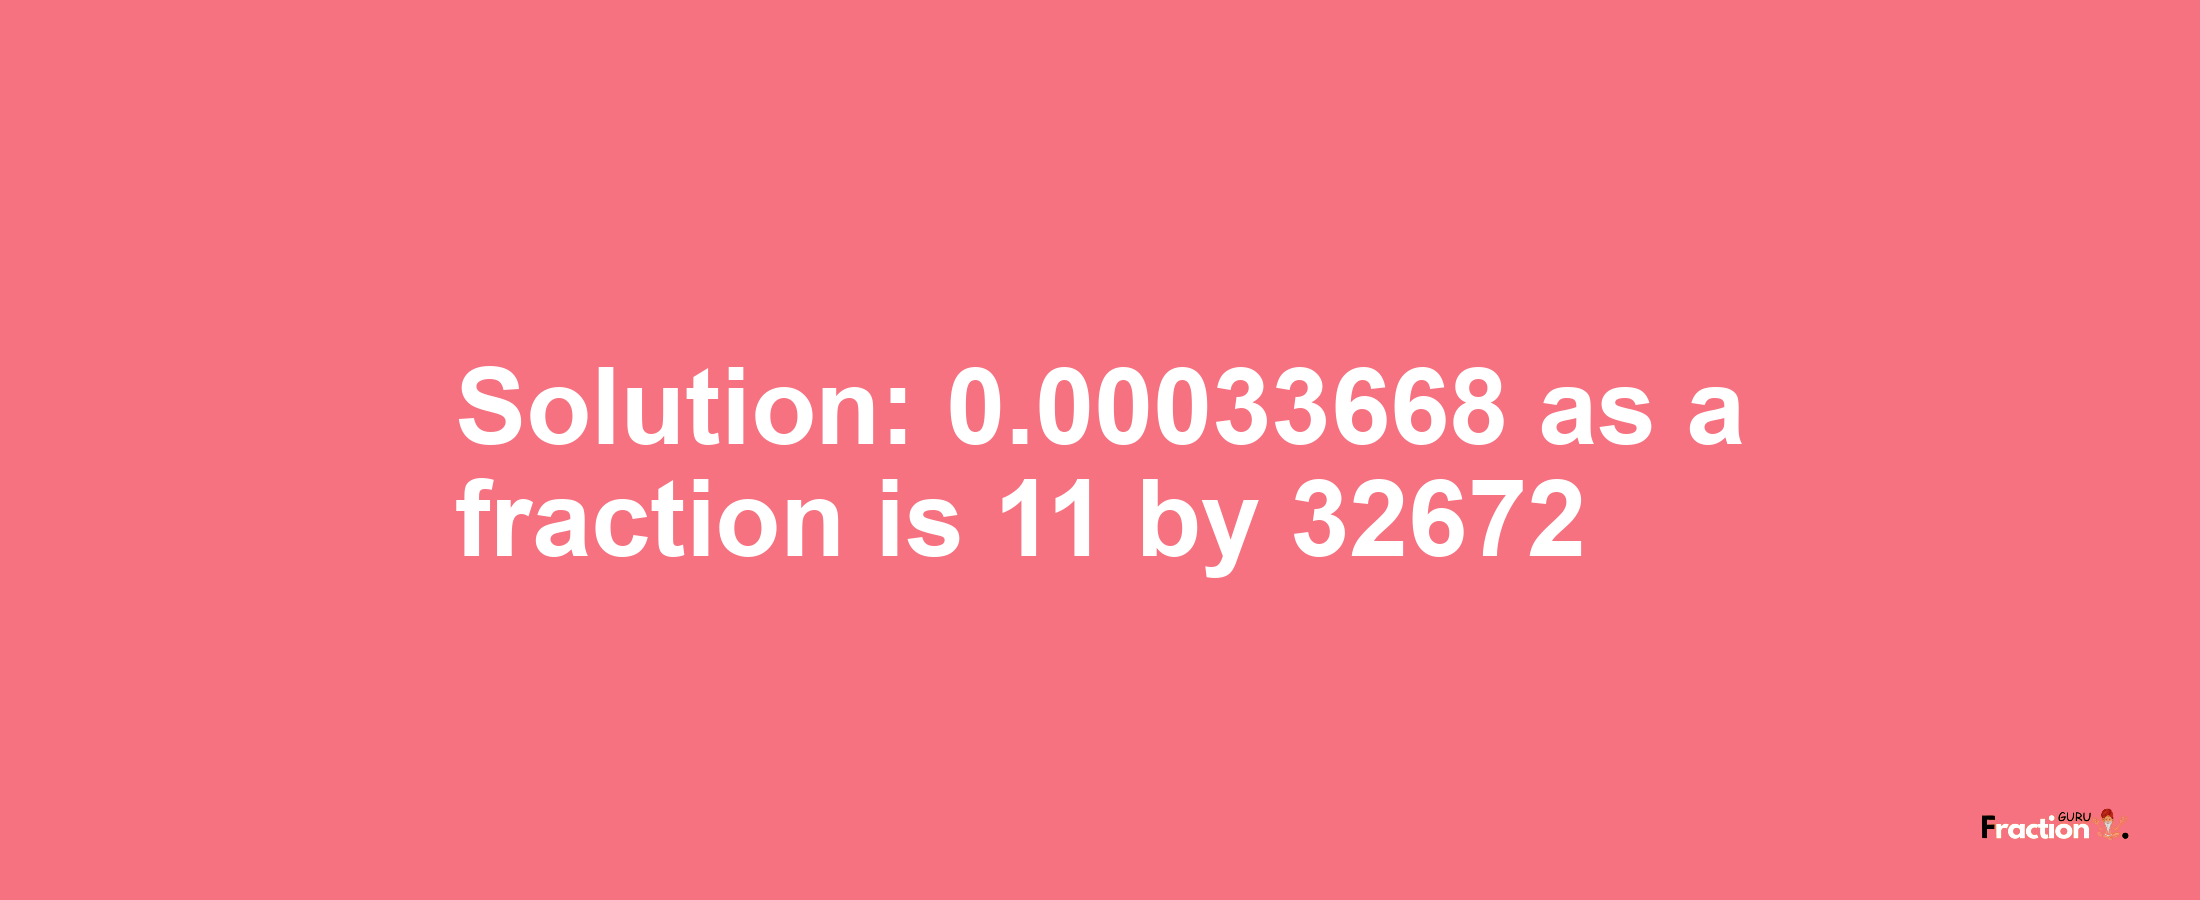 Solution:0.00033668 as a fraction is 11/32672